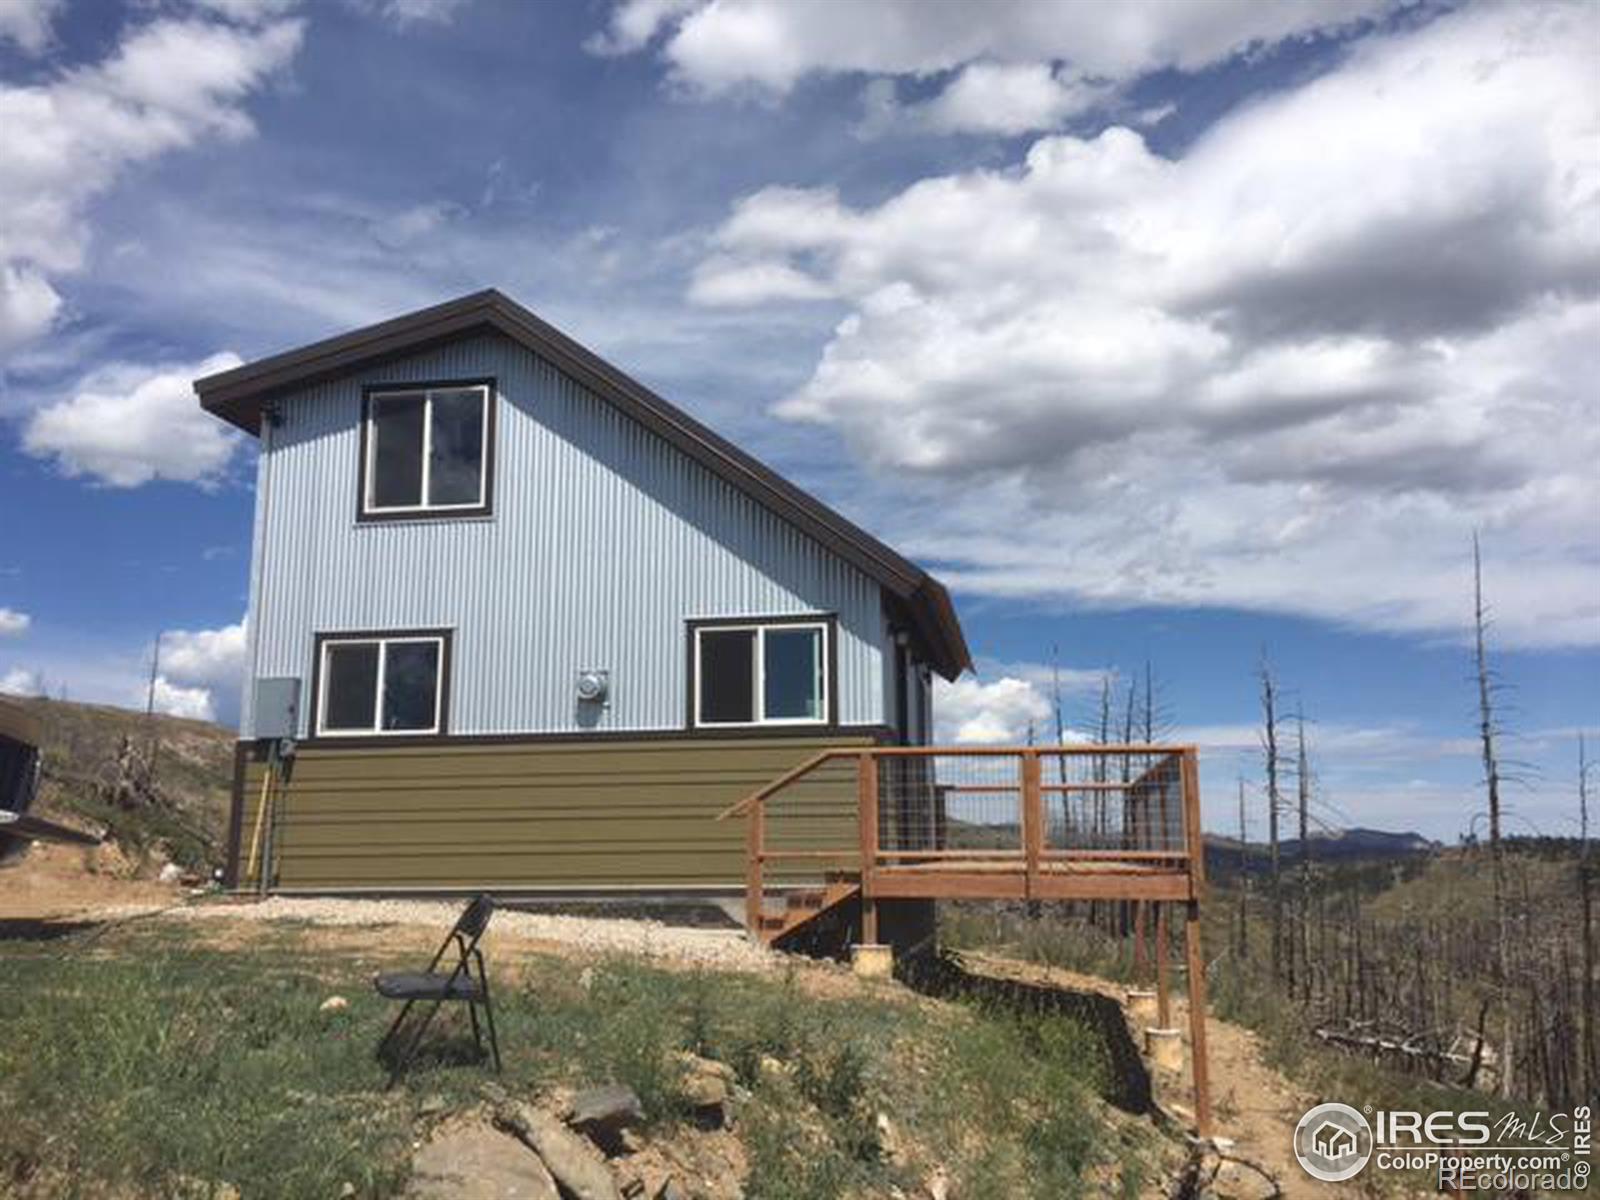 Property: 2518 Whale Rock,Bellvue, CO